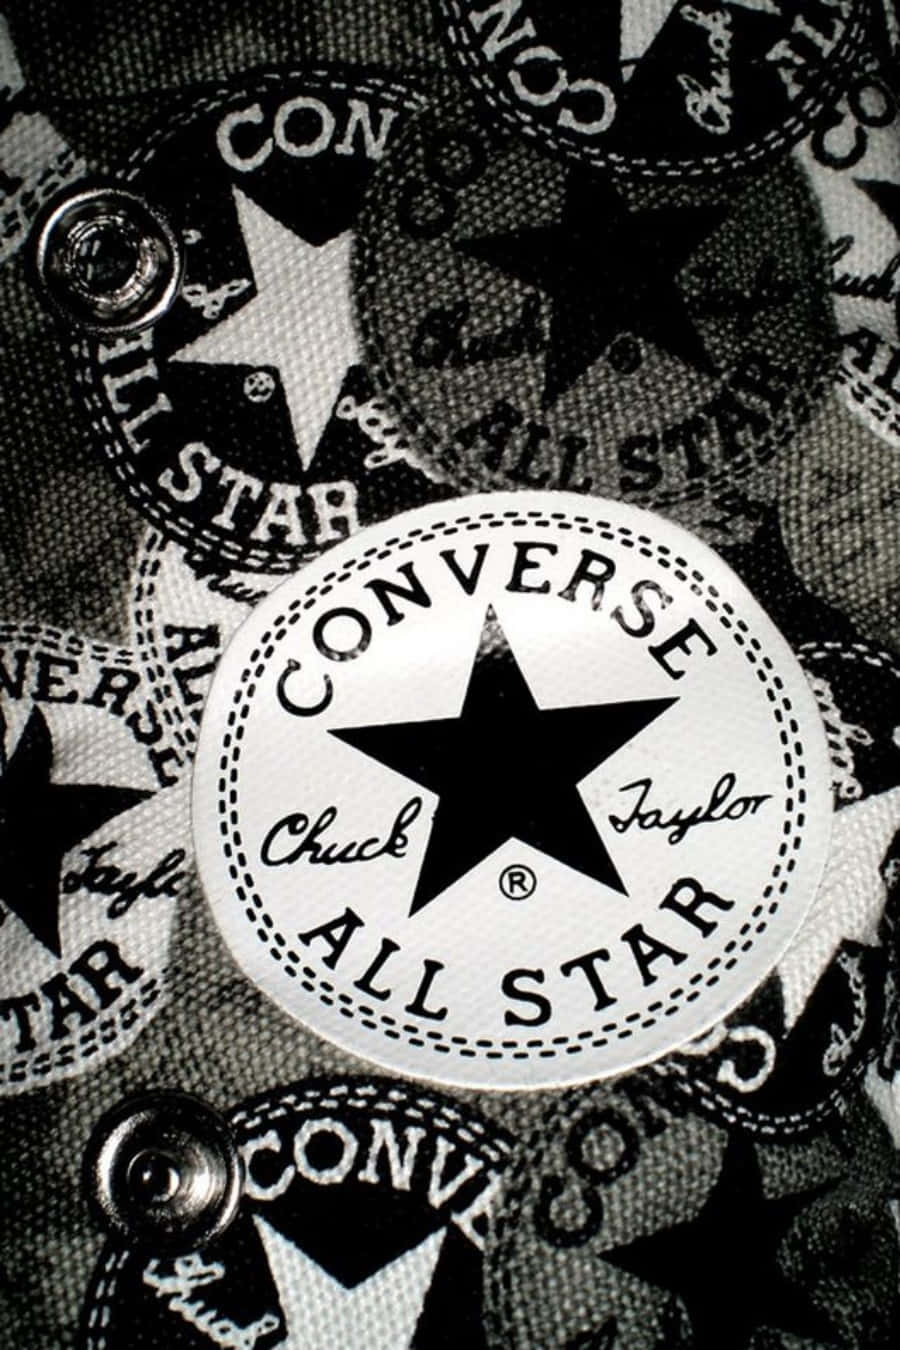 Get ready to hit the streets with Converse Logo!